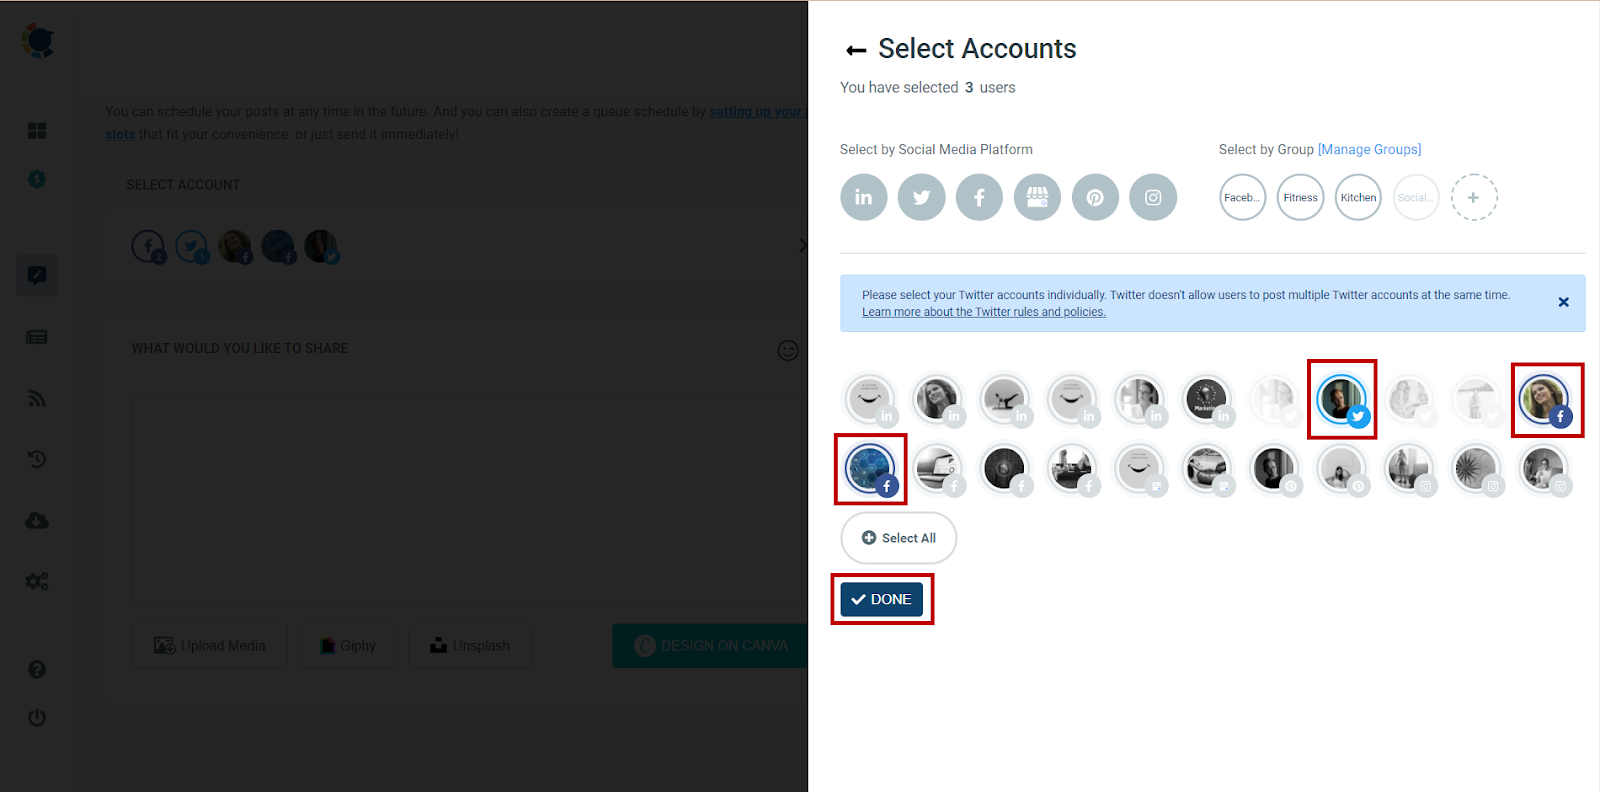 Select your Twitter and Facebook accounts